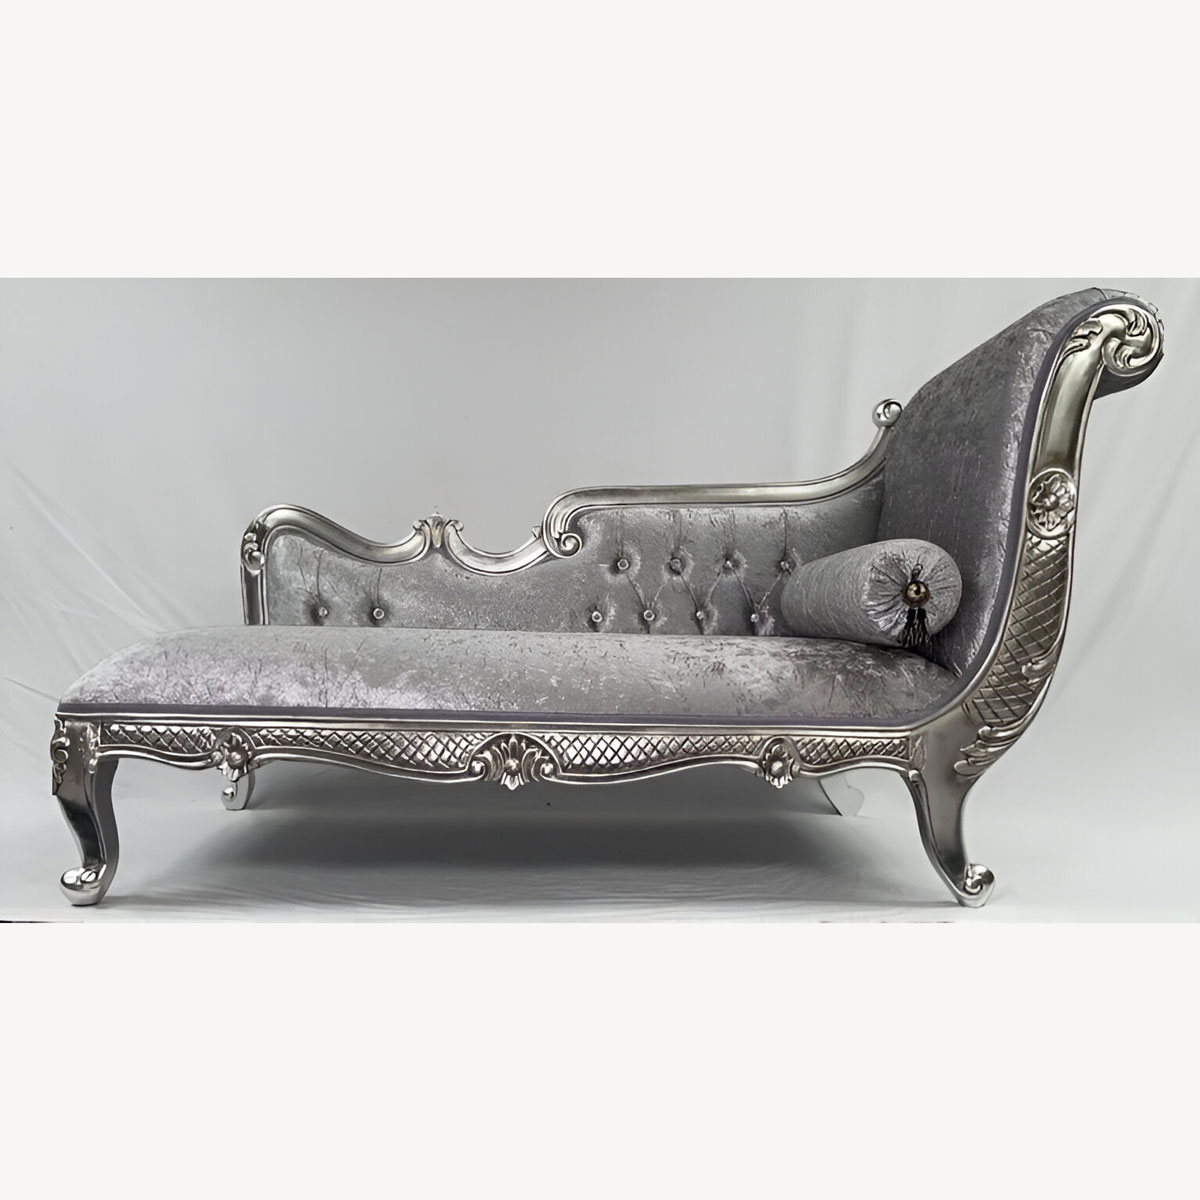 Armani Chaise Longue In Platinum Silver Frame Upholstered In Crushed Silver Velvet Smaller Version 1 - Hampshire Barn Interiors - Armani Chaise Longue In Platinum Silver Frame, Upholstered In Crushed Silver Velvet Smaller Version -